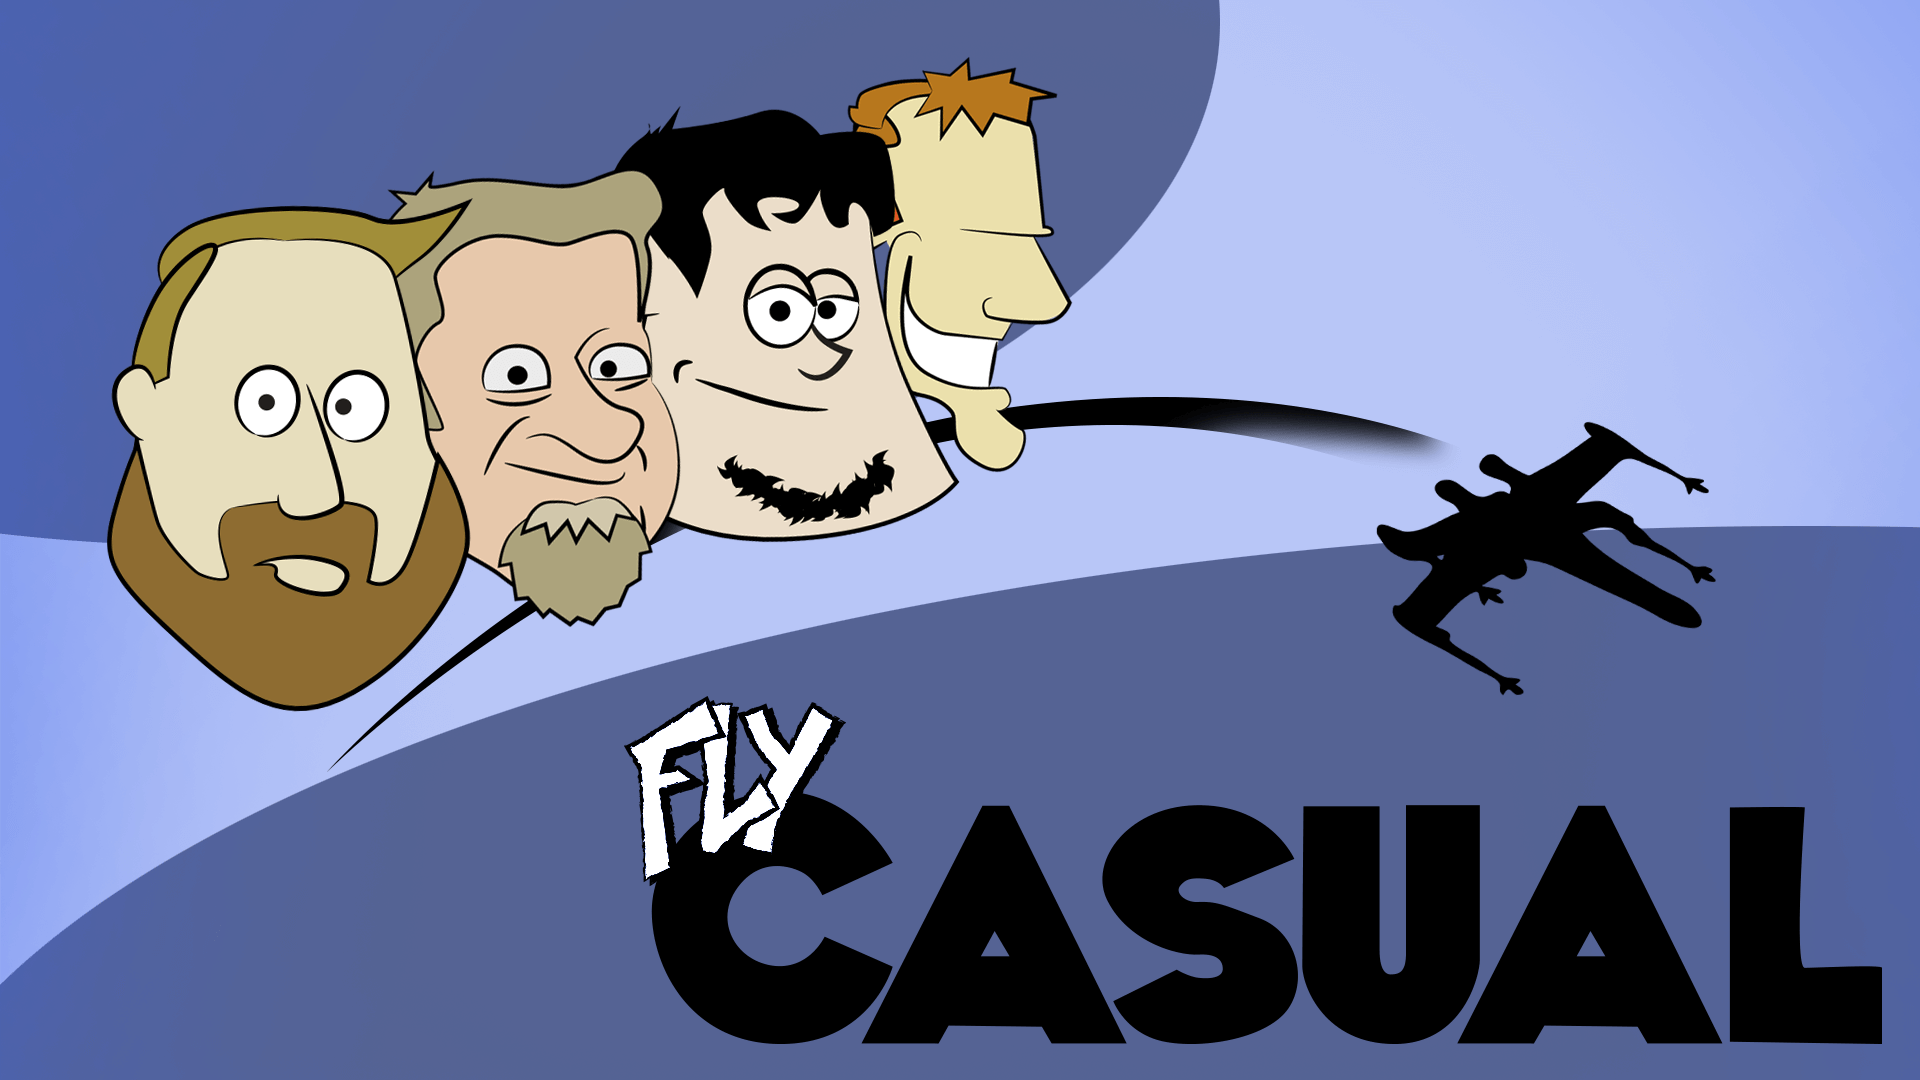 Fly Casualer | Fly Casual Episode 226 | Your Star Wars Podcast